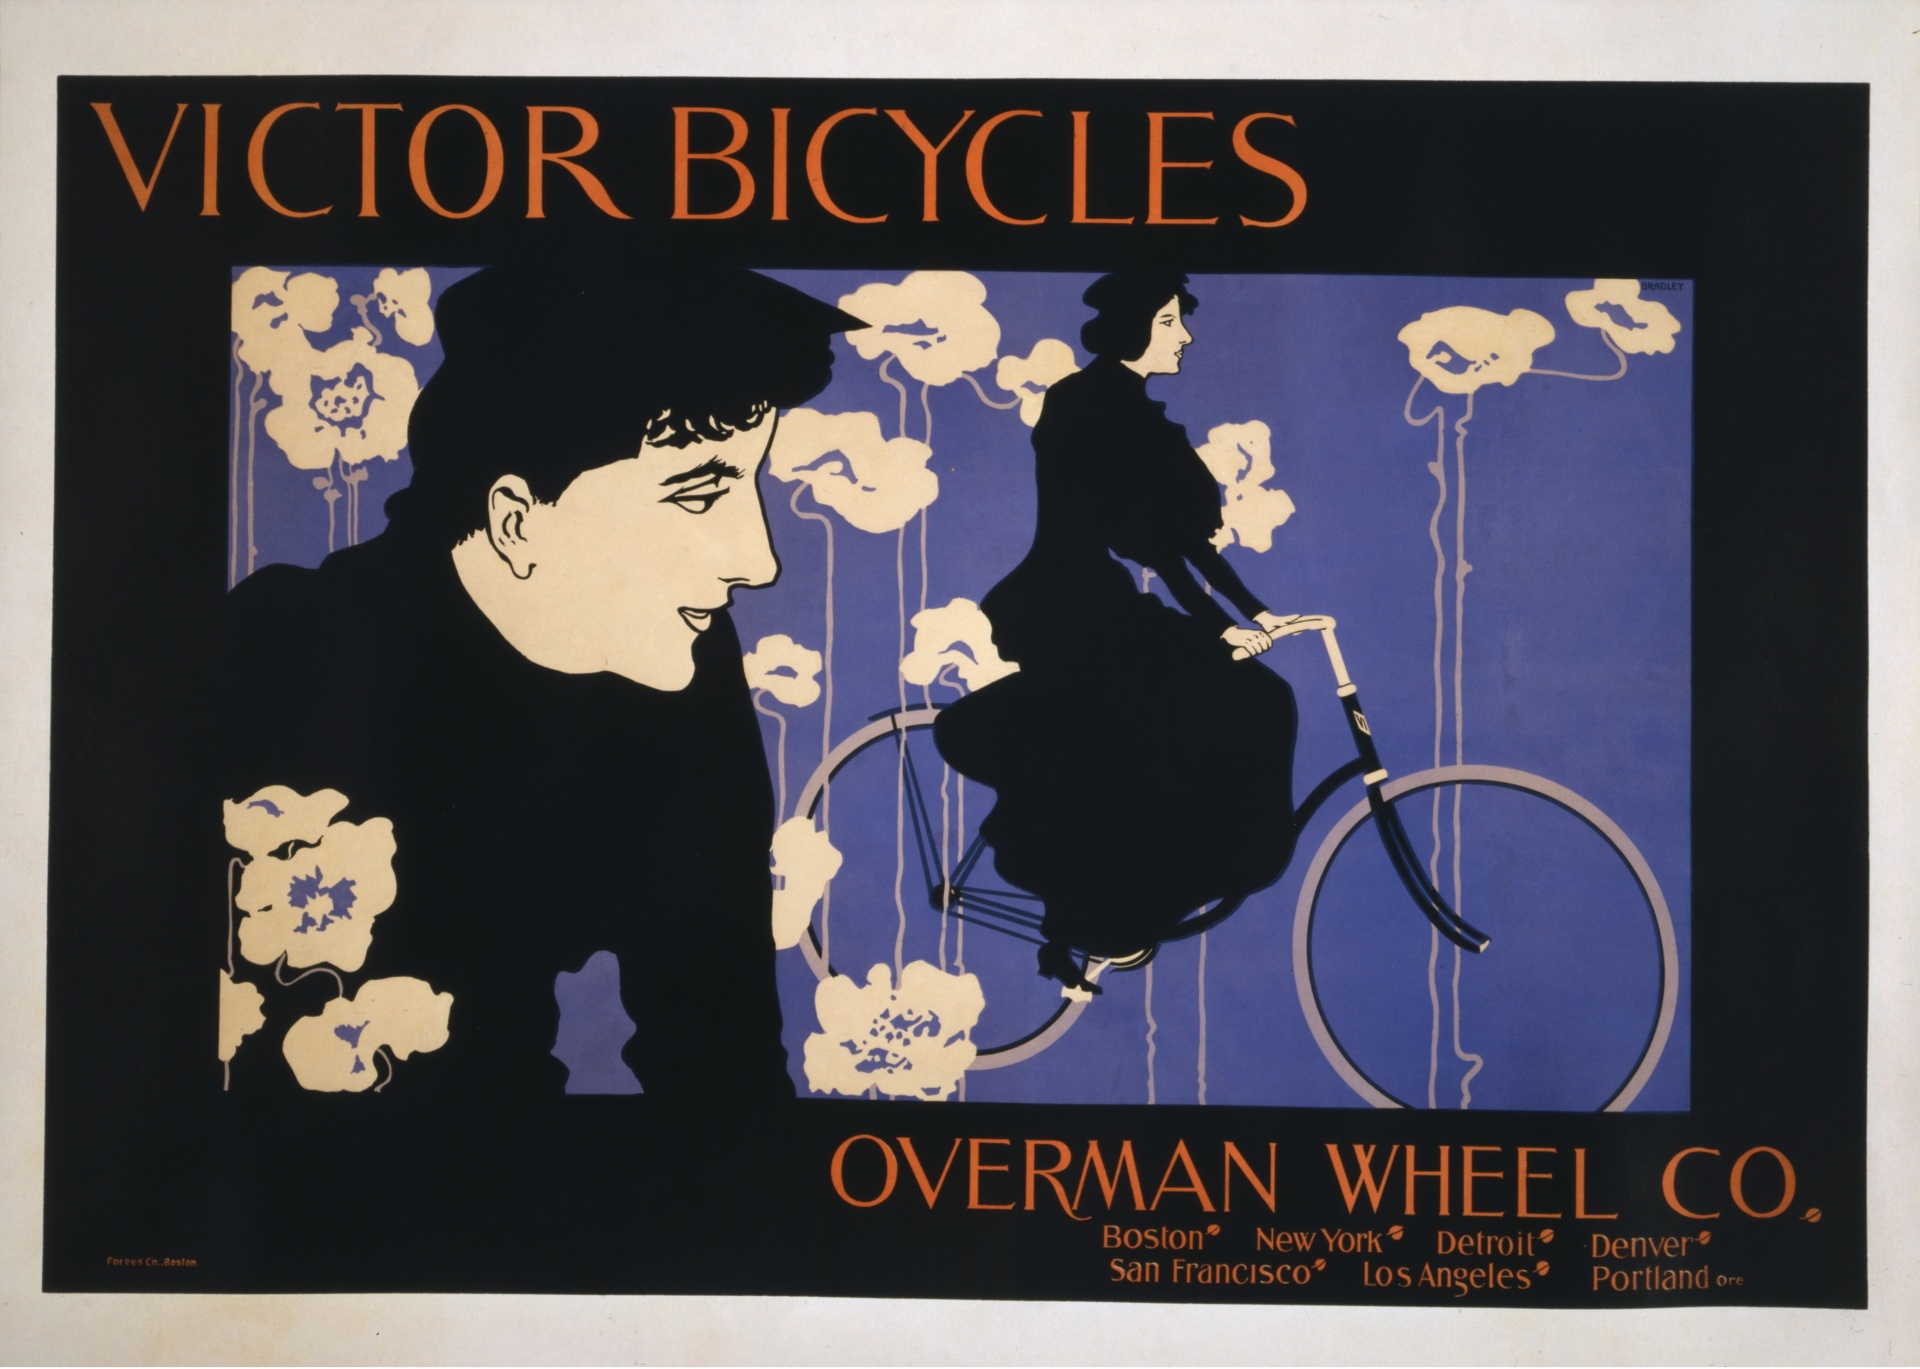 Victor Bicycles Overman Wheel Co